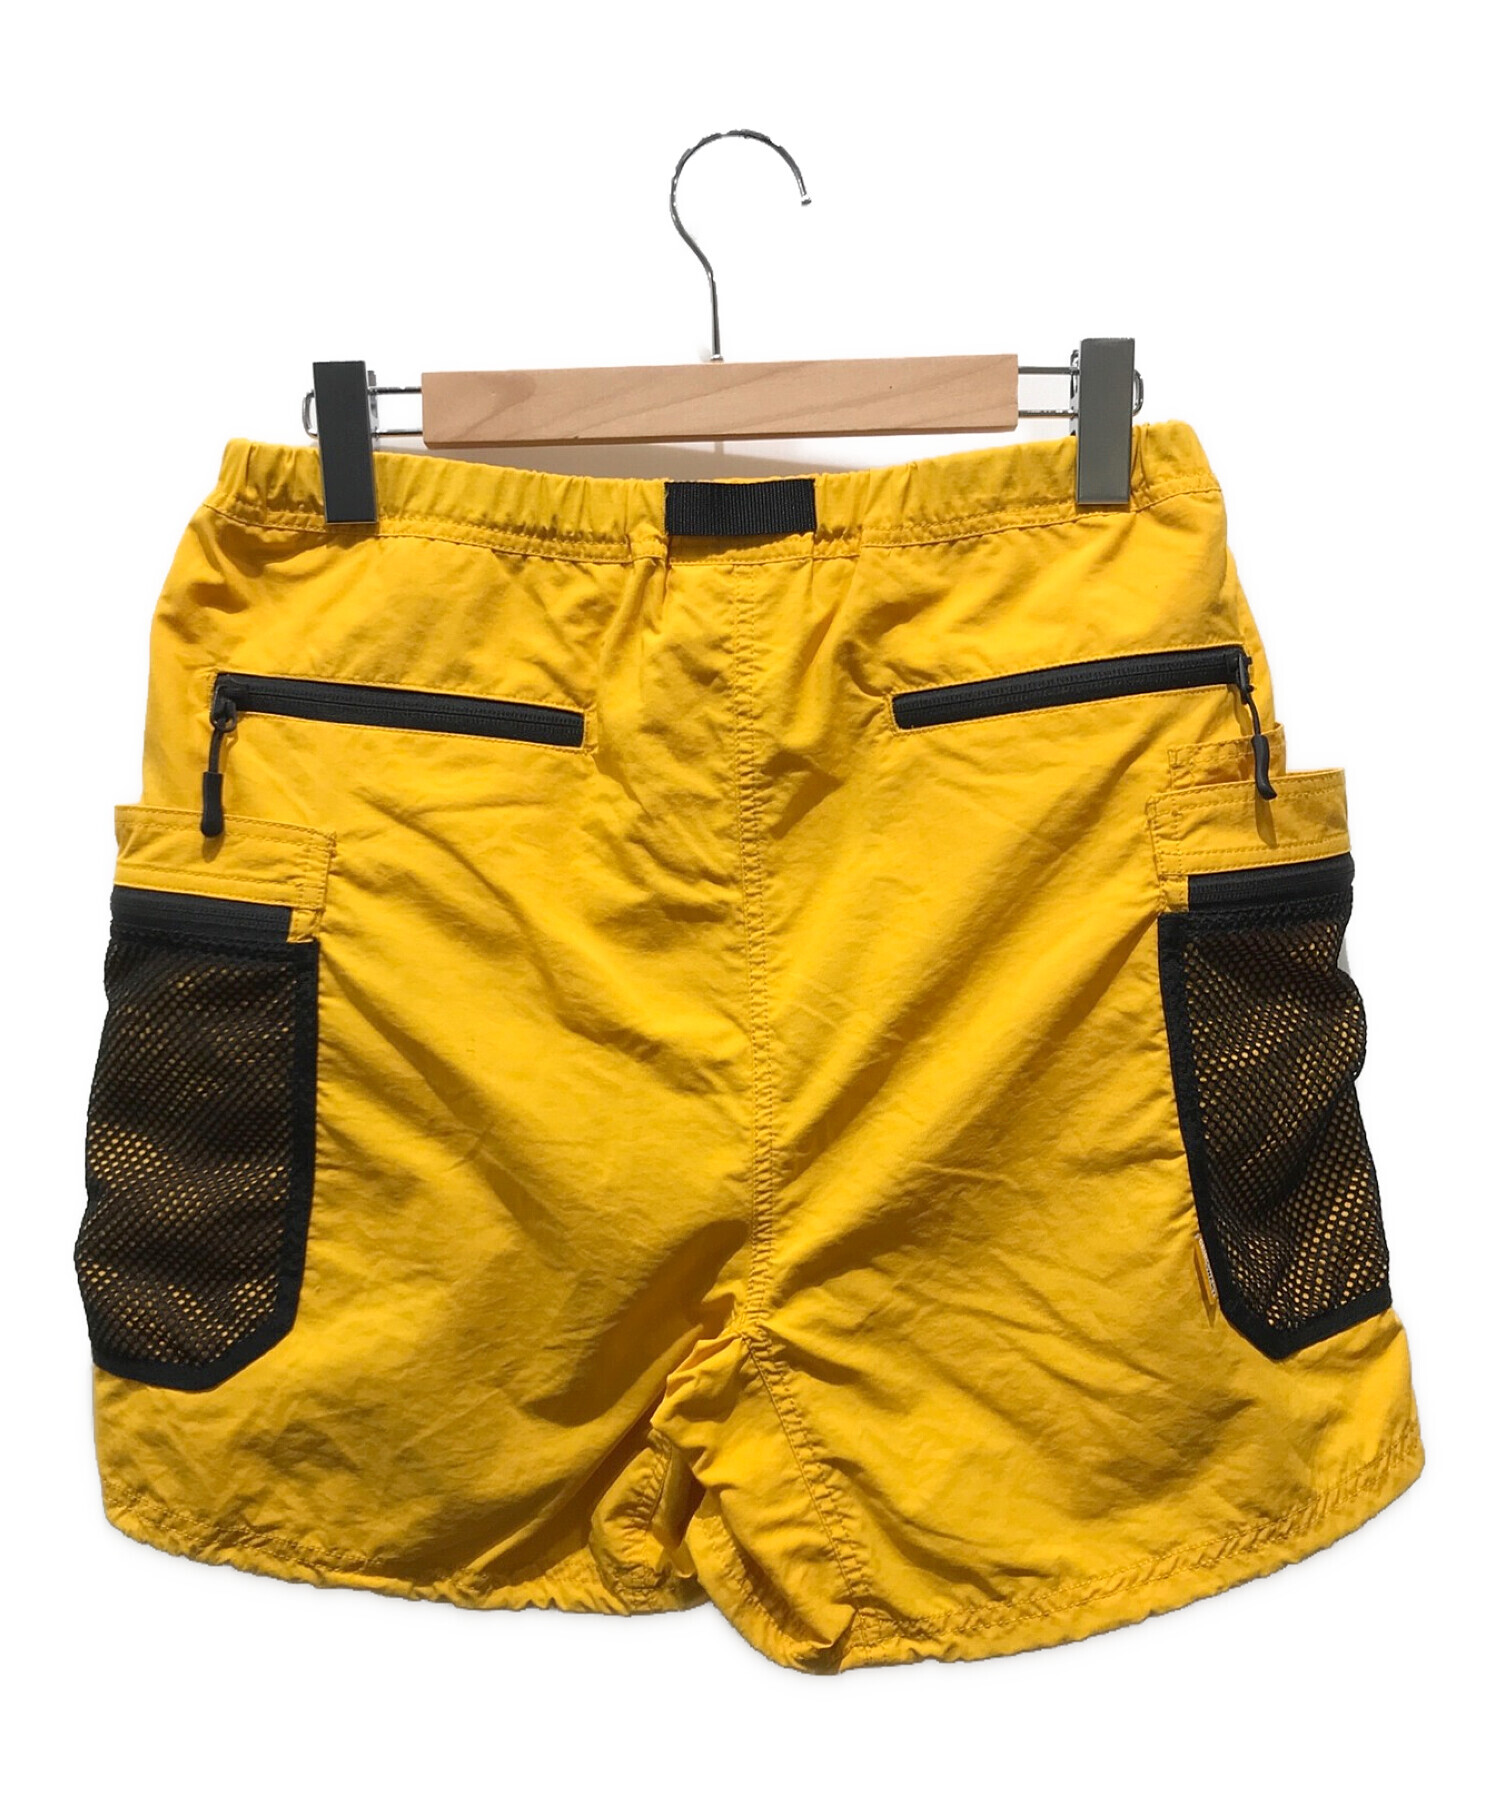 STABRIDGE GRIP SWANY SHORTS Ｍサイズ | www.kinderpartys.at